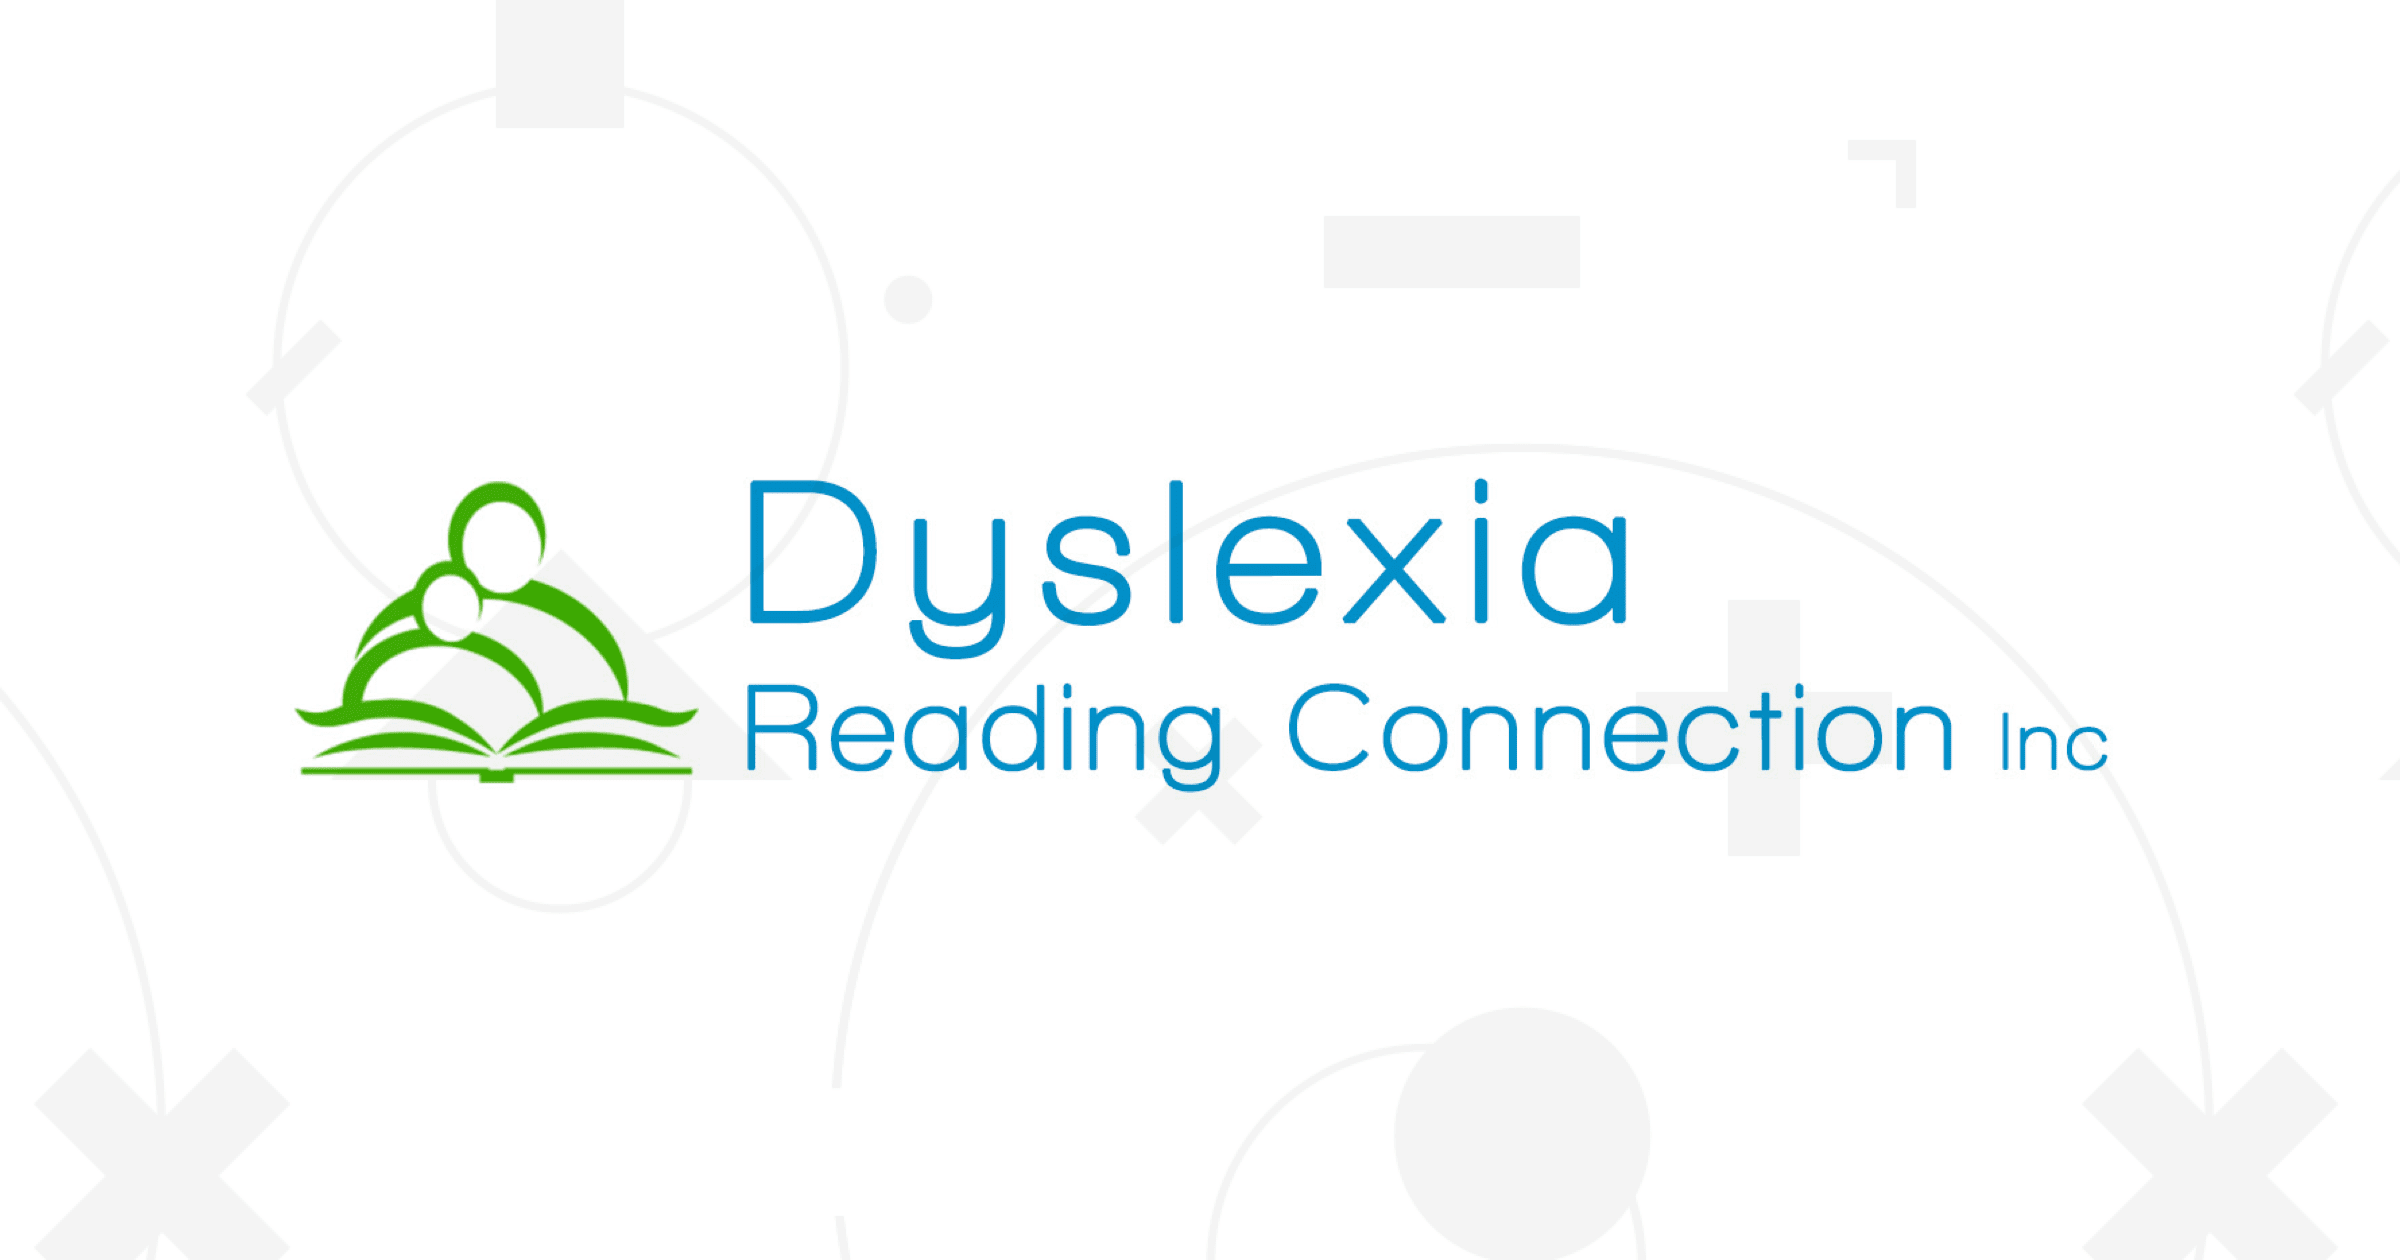 What was Your Favorite Subject in School? - Dyslexia Reading Connection